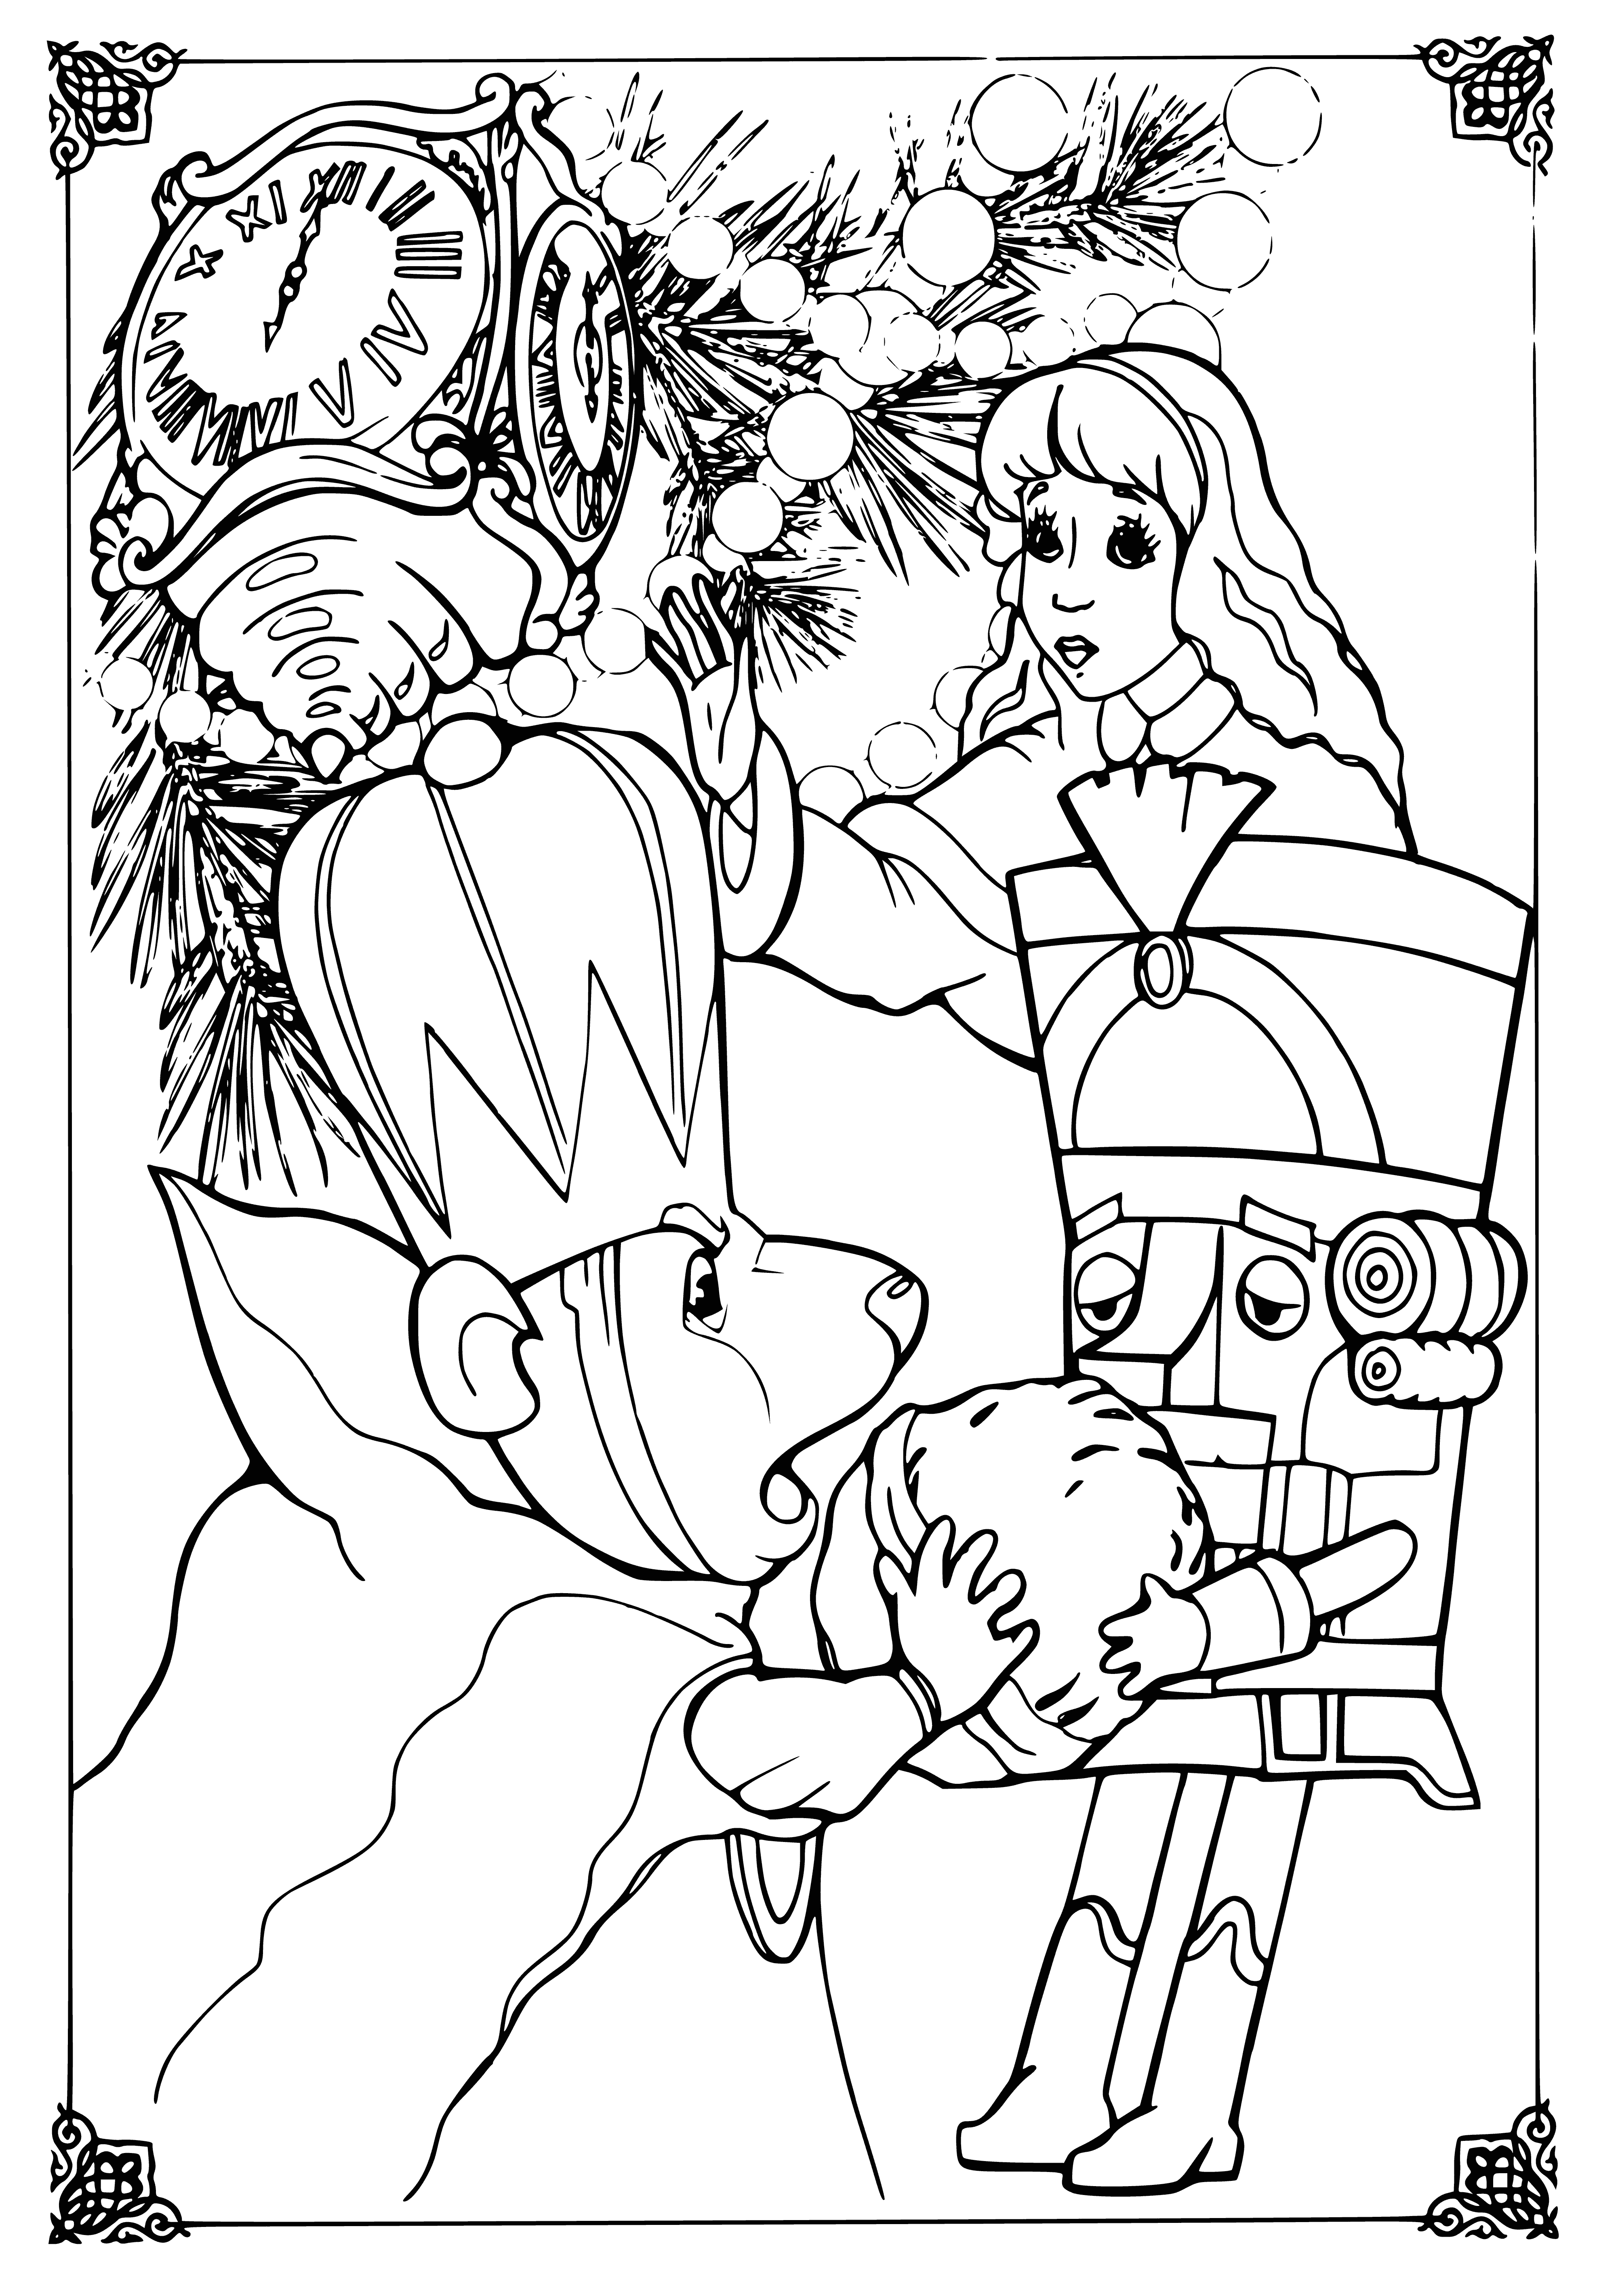 coloring page: Nutcracker watches nut levitate away in a magical cloud of dust and smiles.